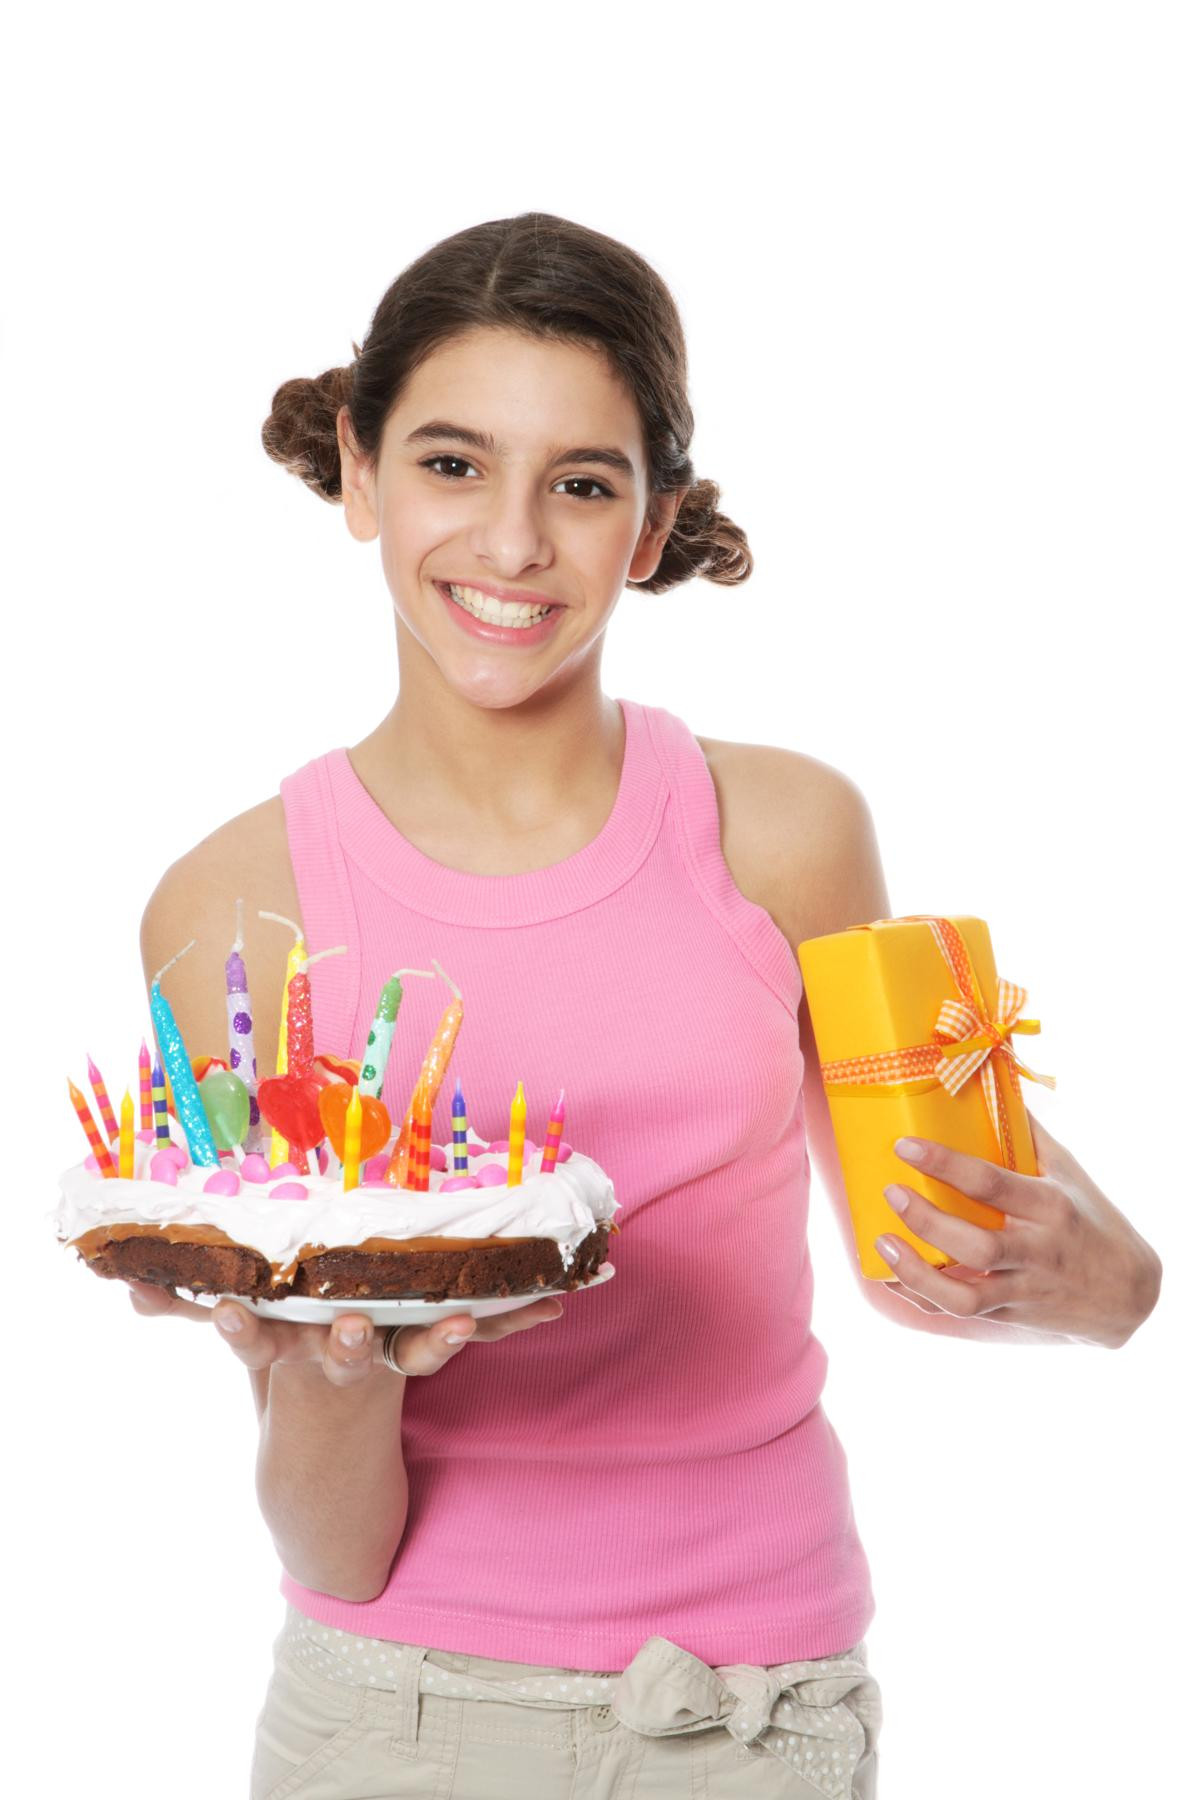 14 Birthday Party Ideas
 Really Innovative Birthday Party Ideas for 14 Year Olds